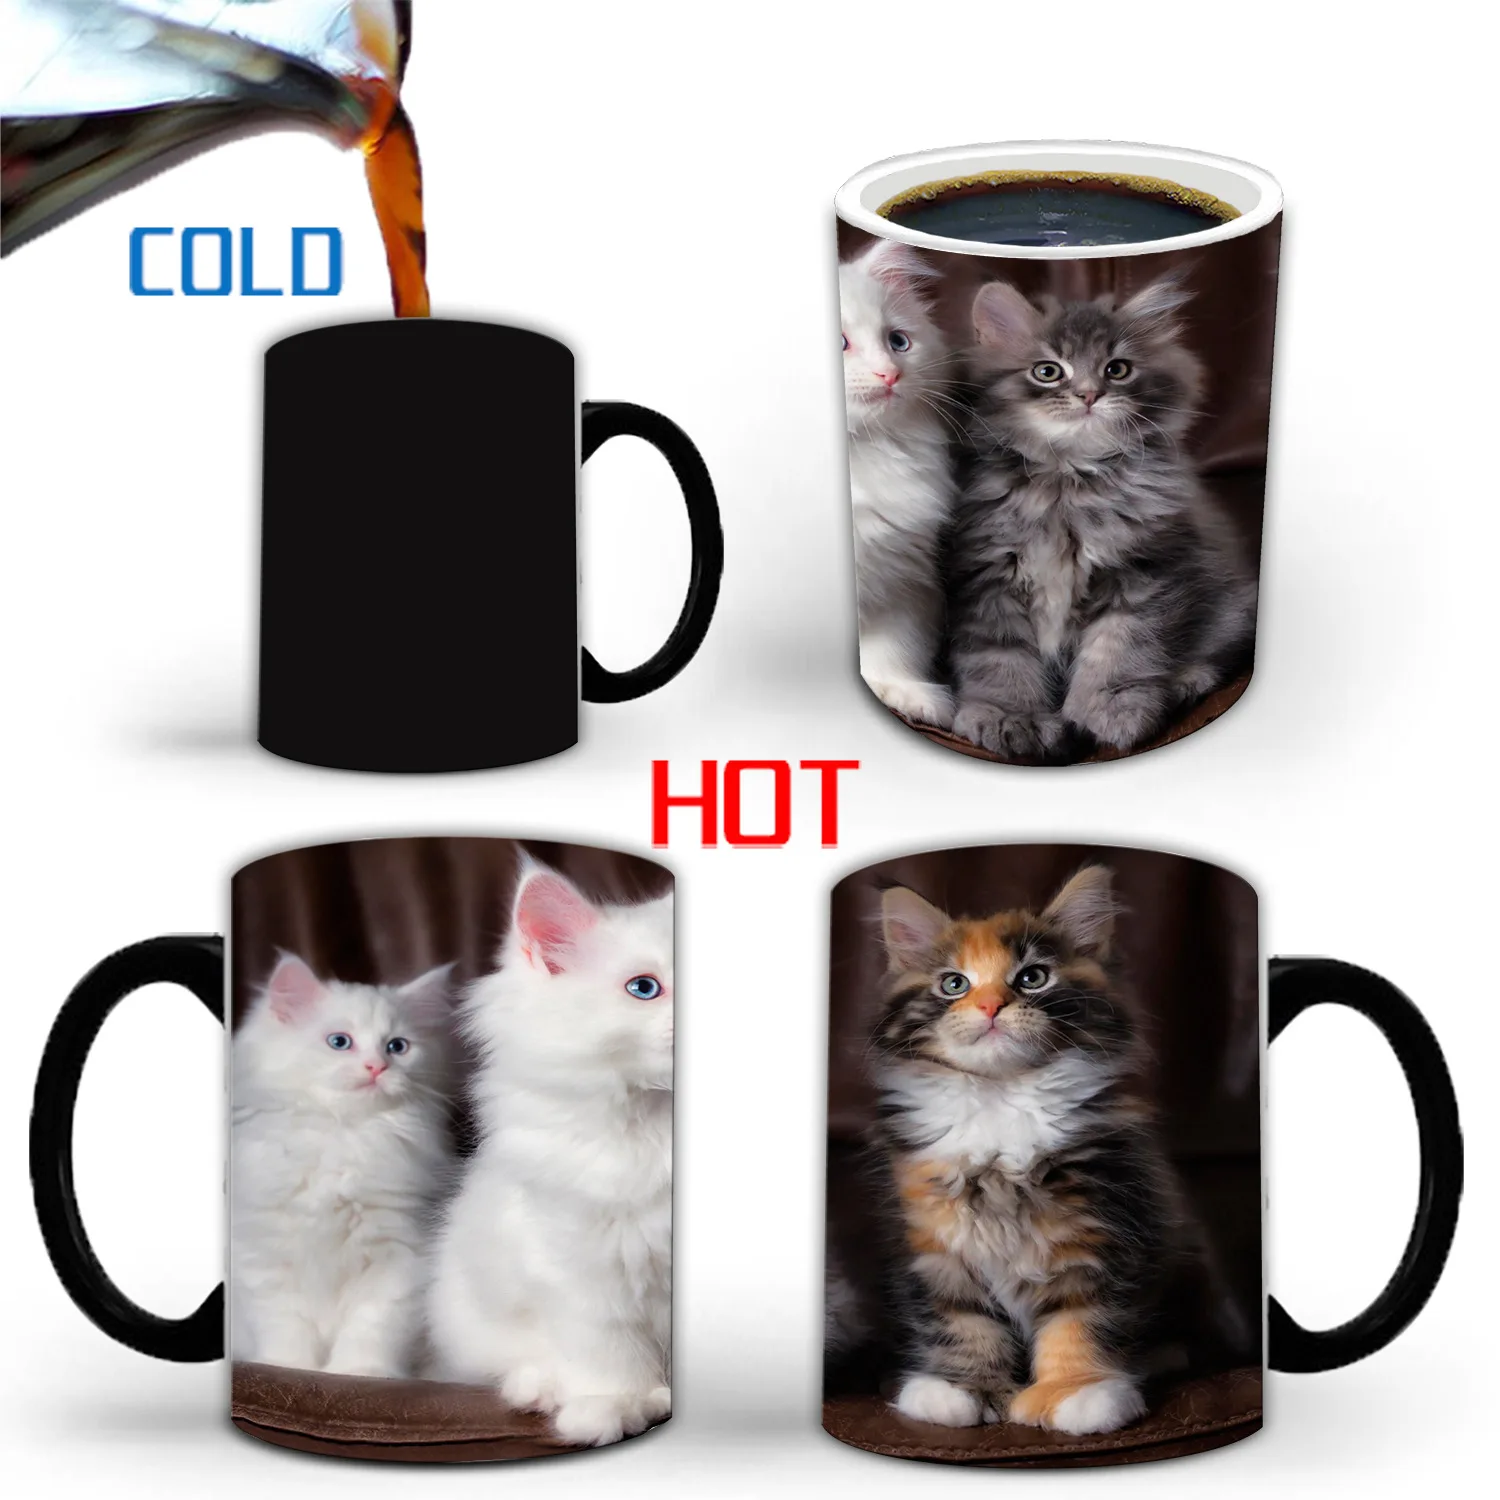 

Cat Coffee Mugs Cocoa Caffeine Cereal Tea Cup Pet Lover Gifts Home Decal Papa Mum Dad Mom Lady Coffeeware Heat Reveal Teaware